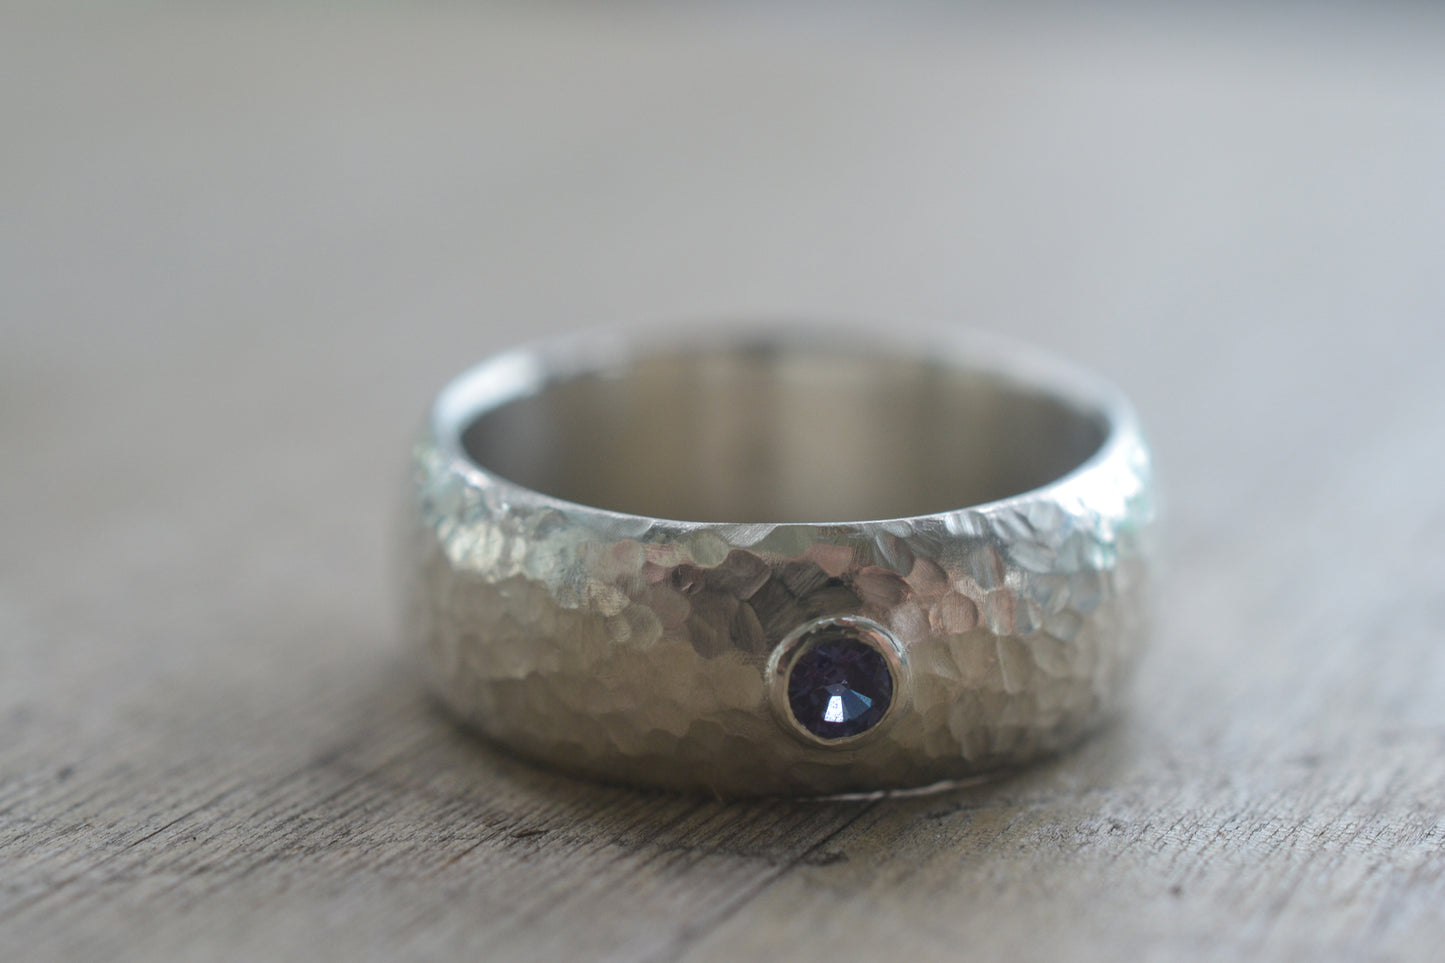 Beaten Silver Wedding Band With 3mm Round Stone